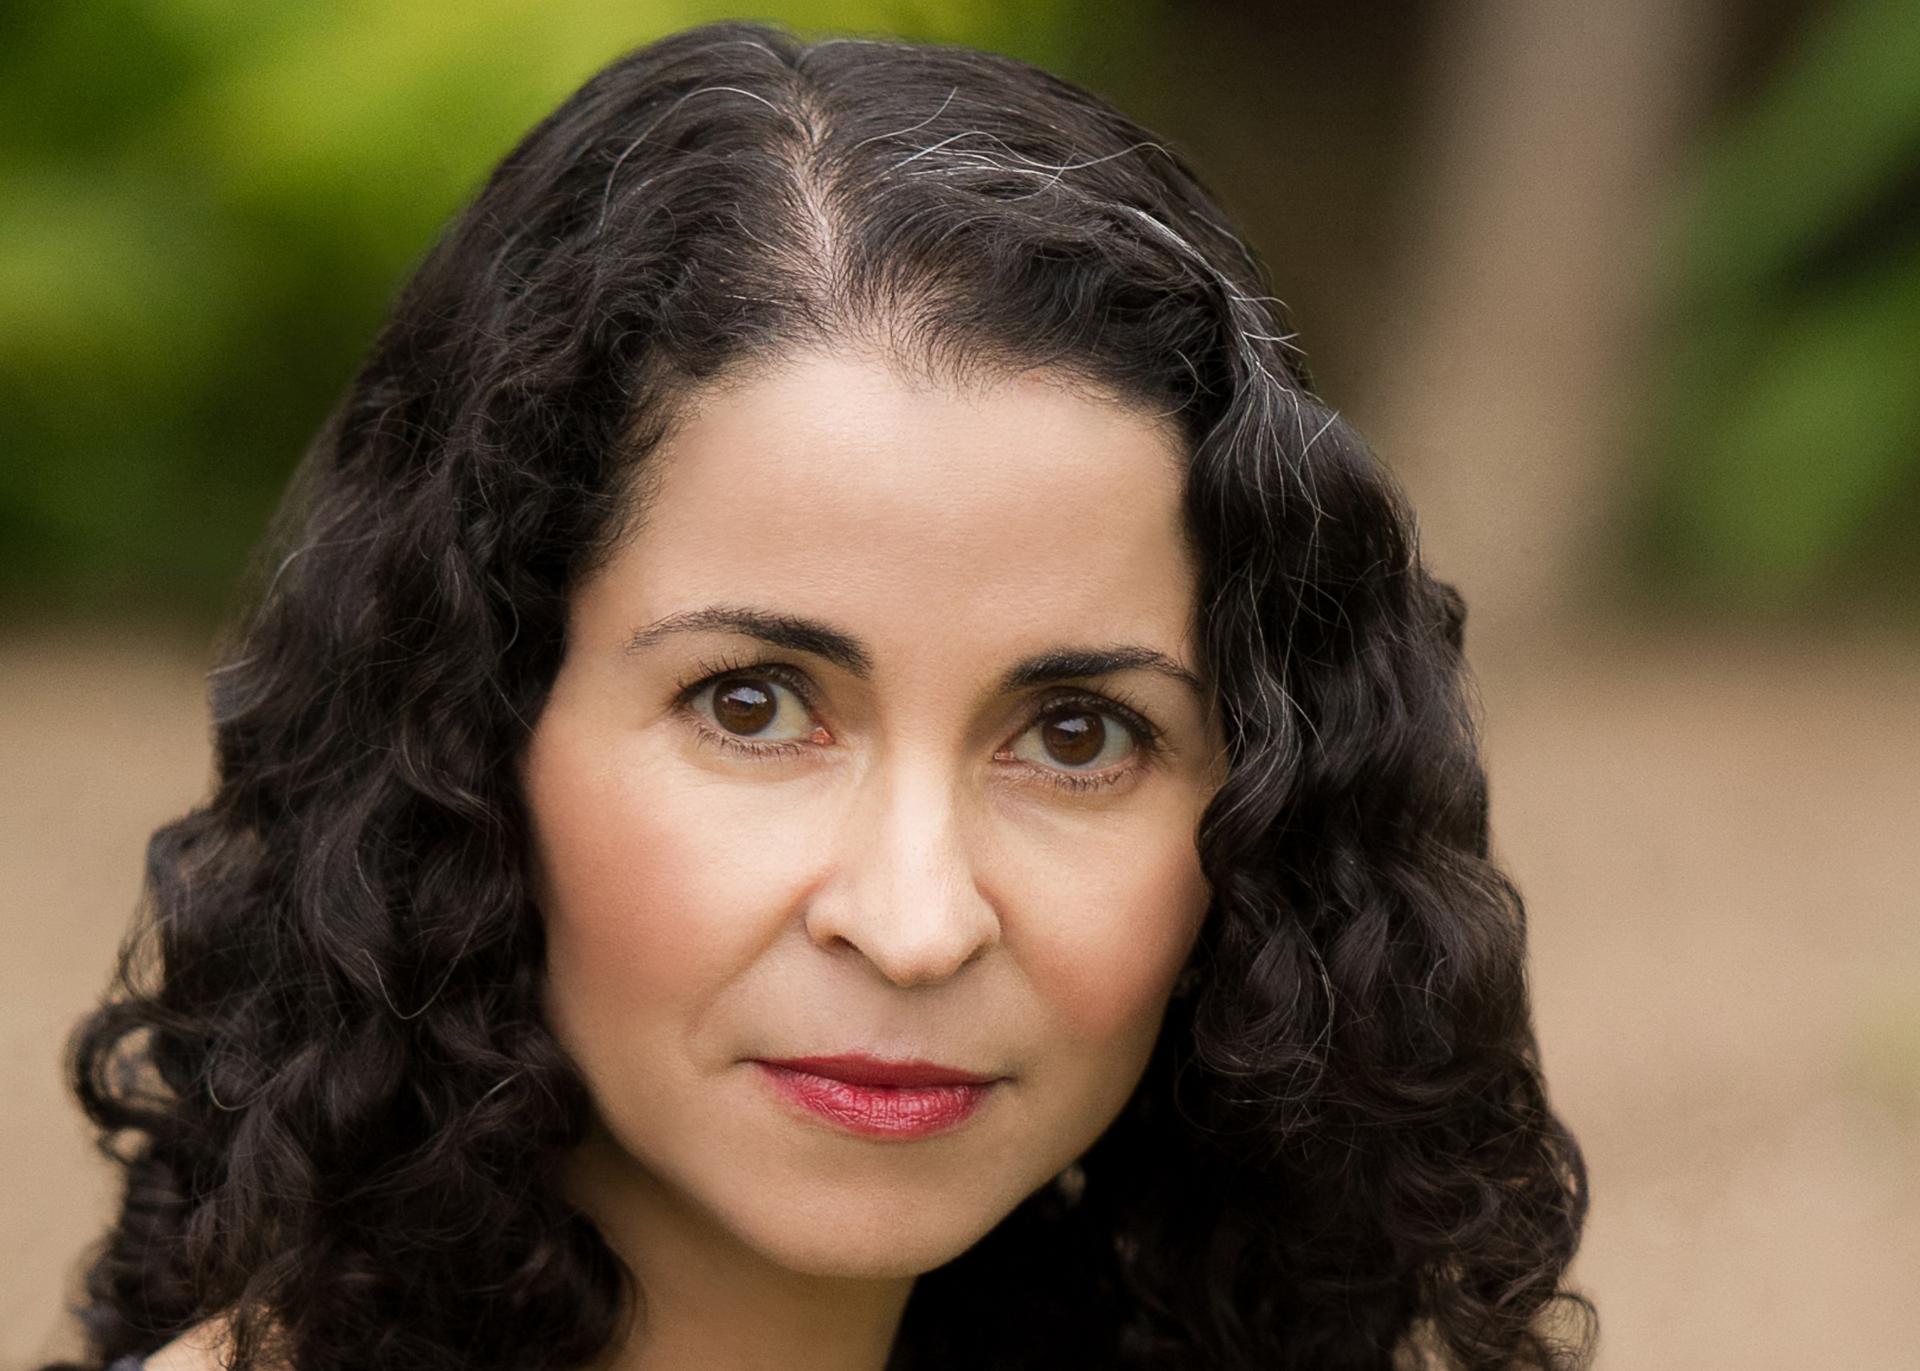 Author Laila Lalami was born in Rabat, Morocco. 